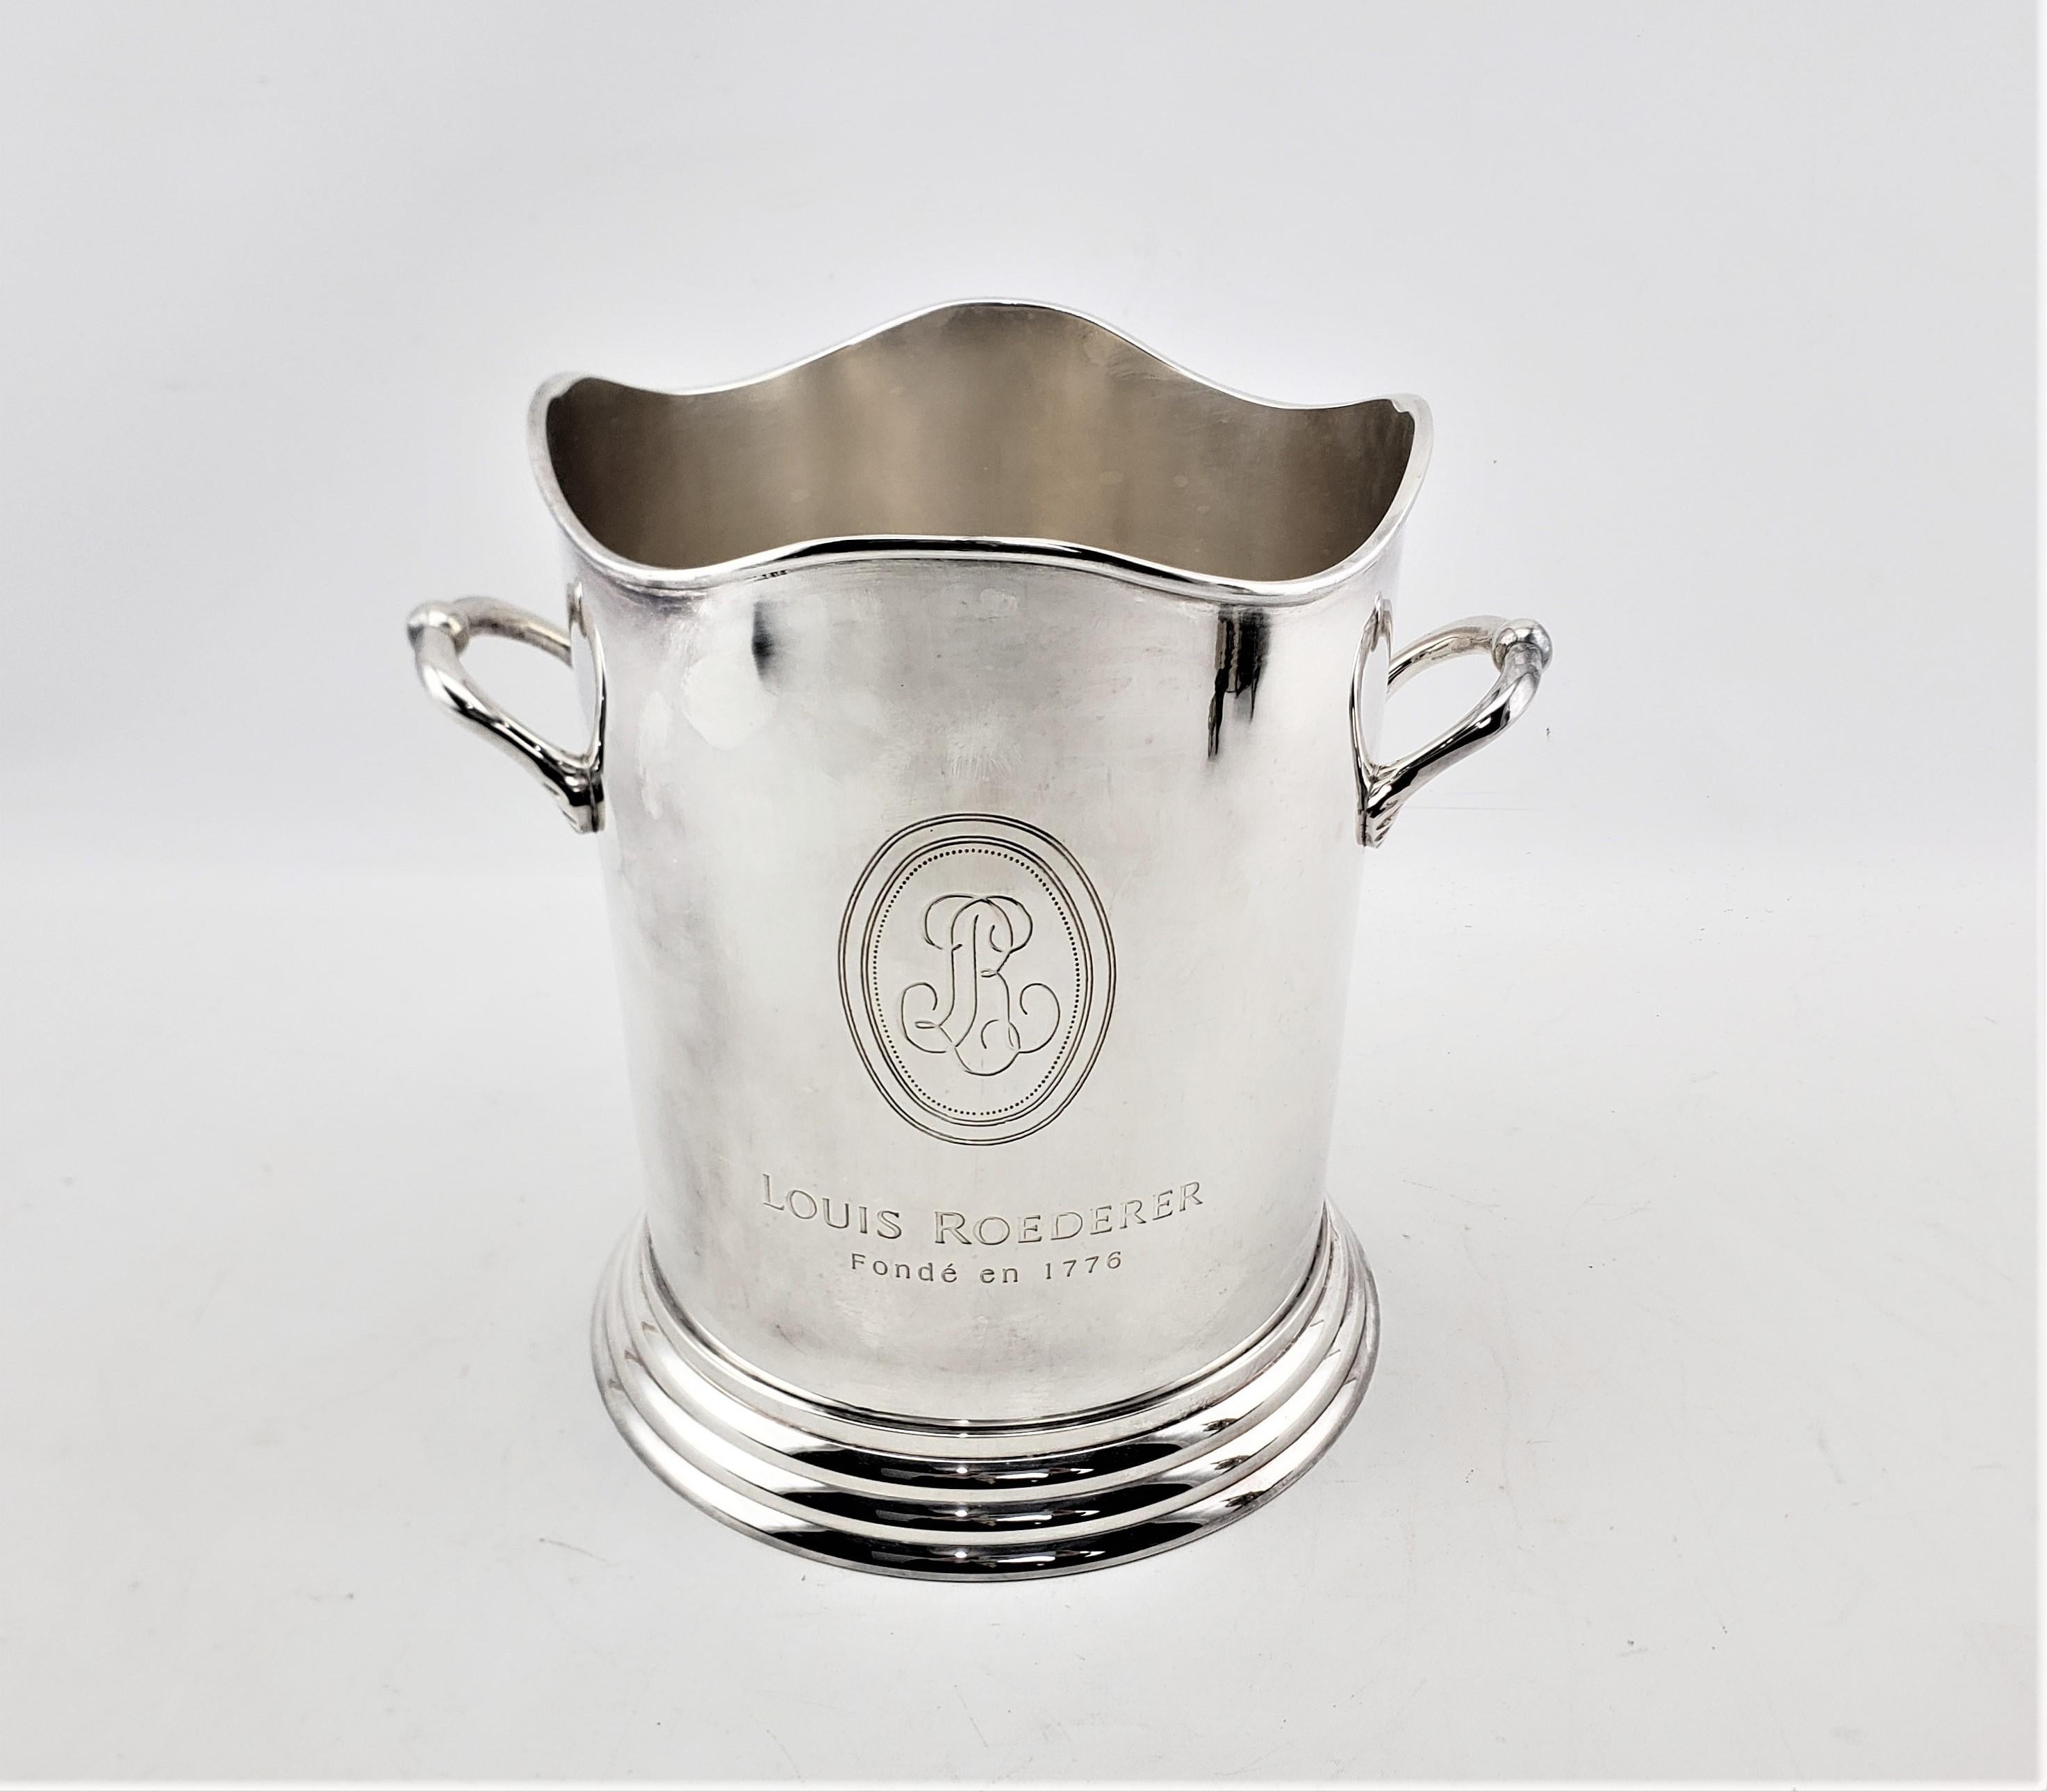 This silver or chrome plated champagne bucket is unsigned, but presumed to have originated from France and date to approximately 1960 and done in a Renaissance Revival style. The champagne bucket was made to advertise or commemorate the highly